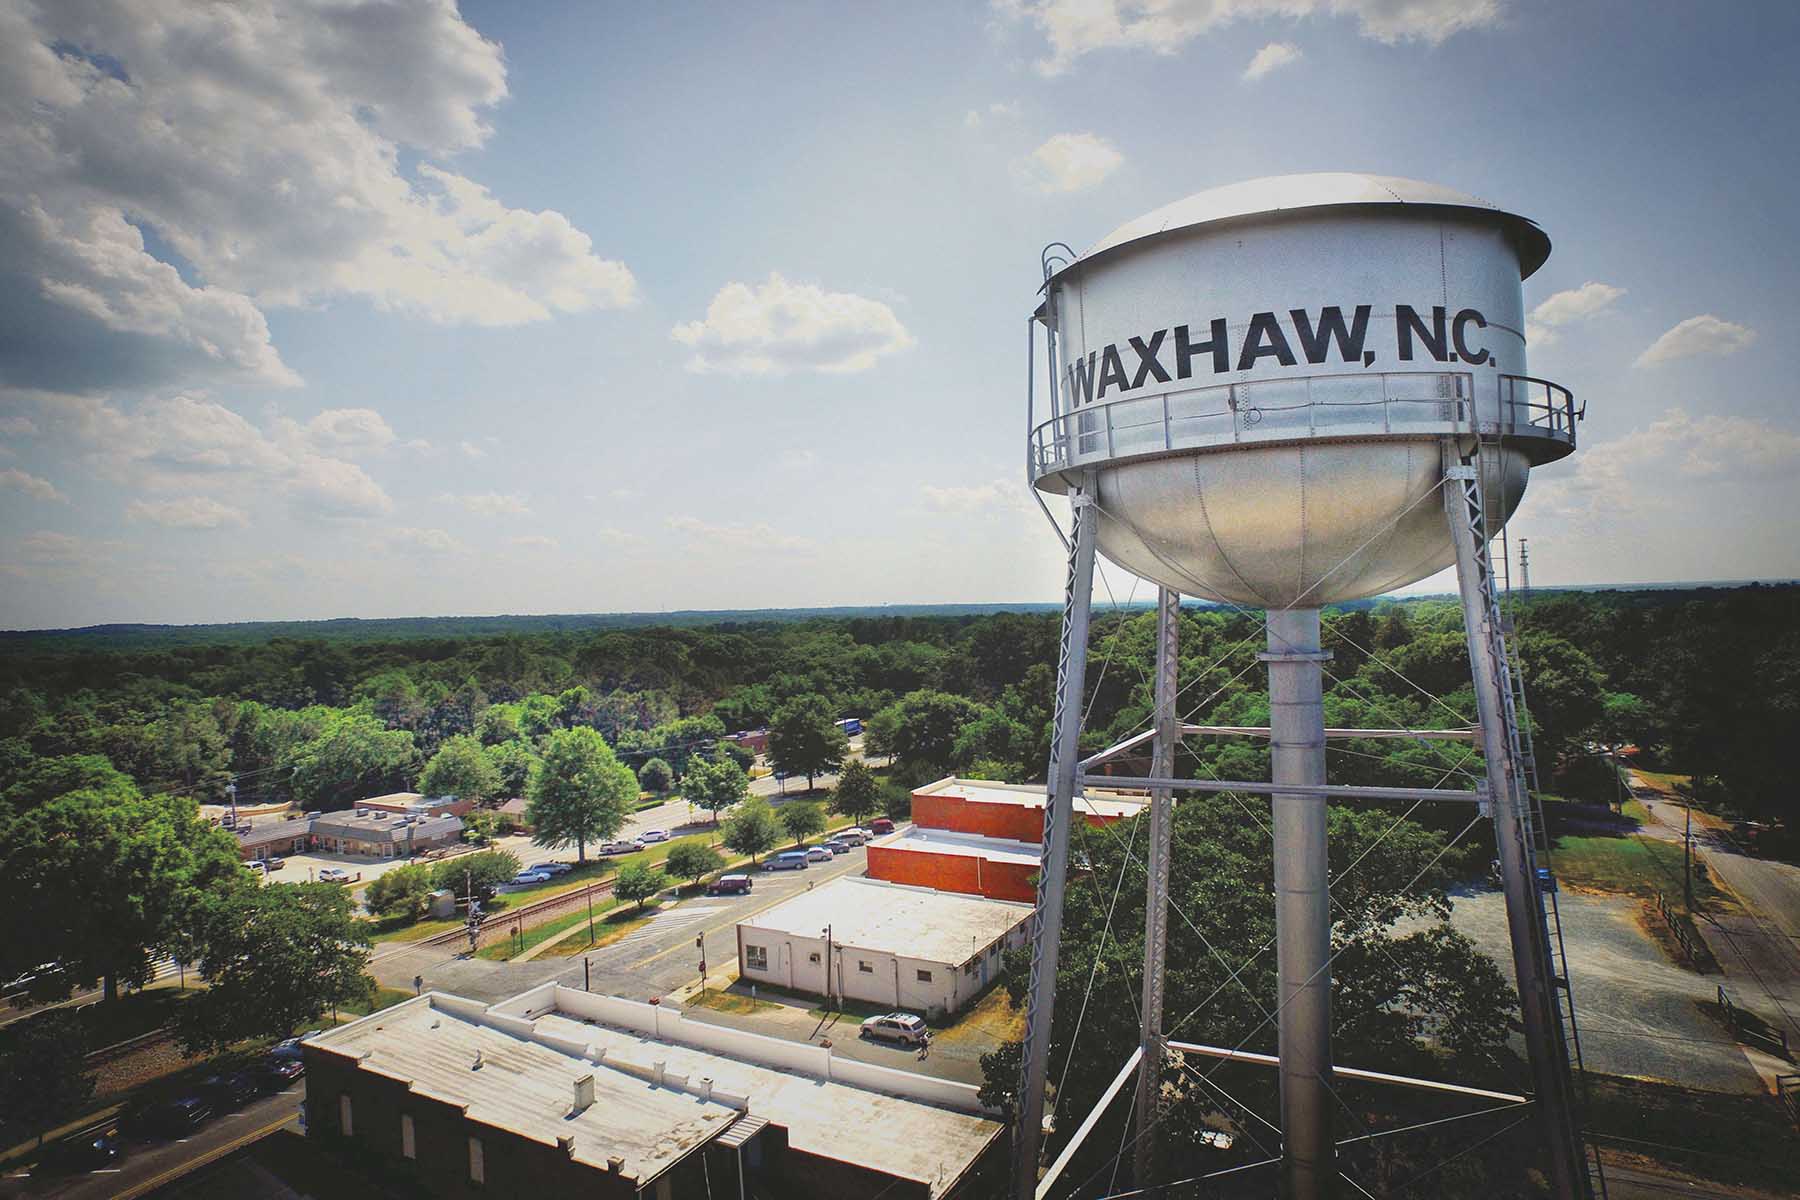 8 Reasons to Call Waxhaw, NC Home | Welcome to Better - M/I Homes